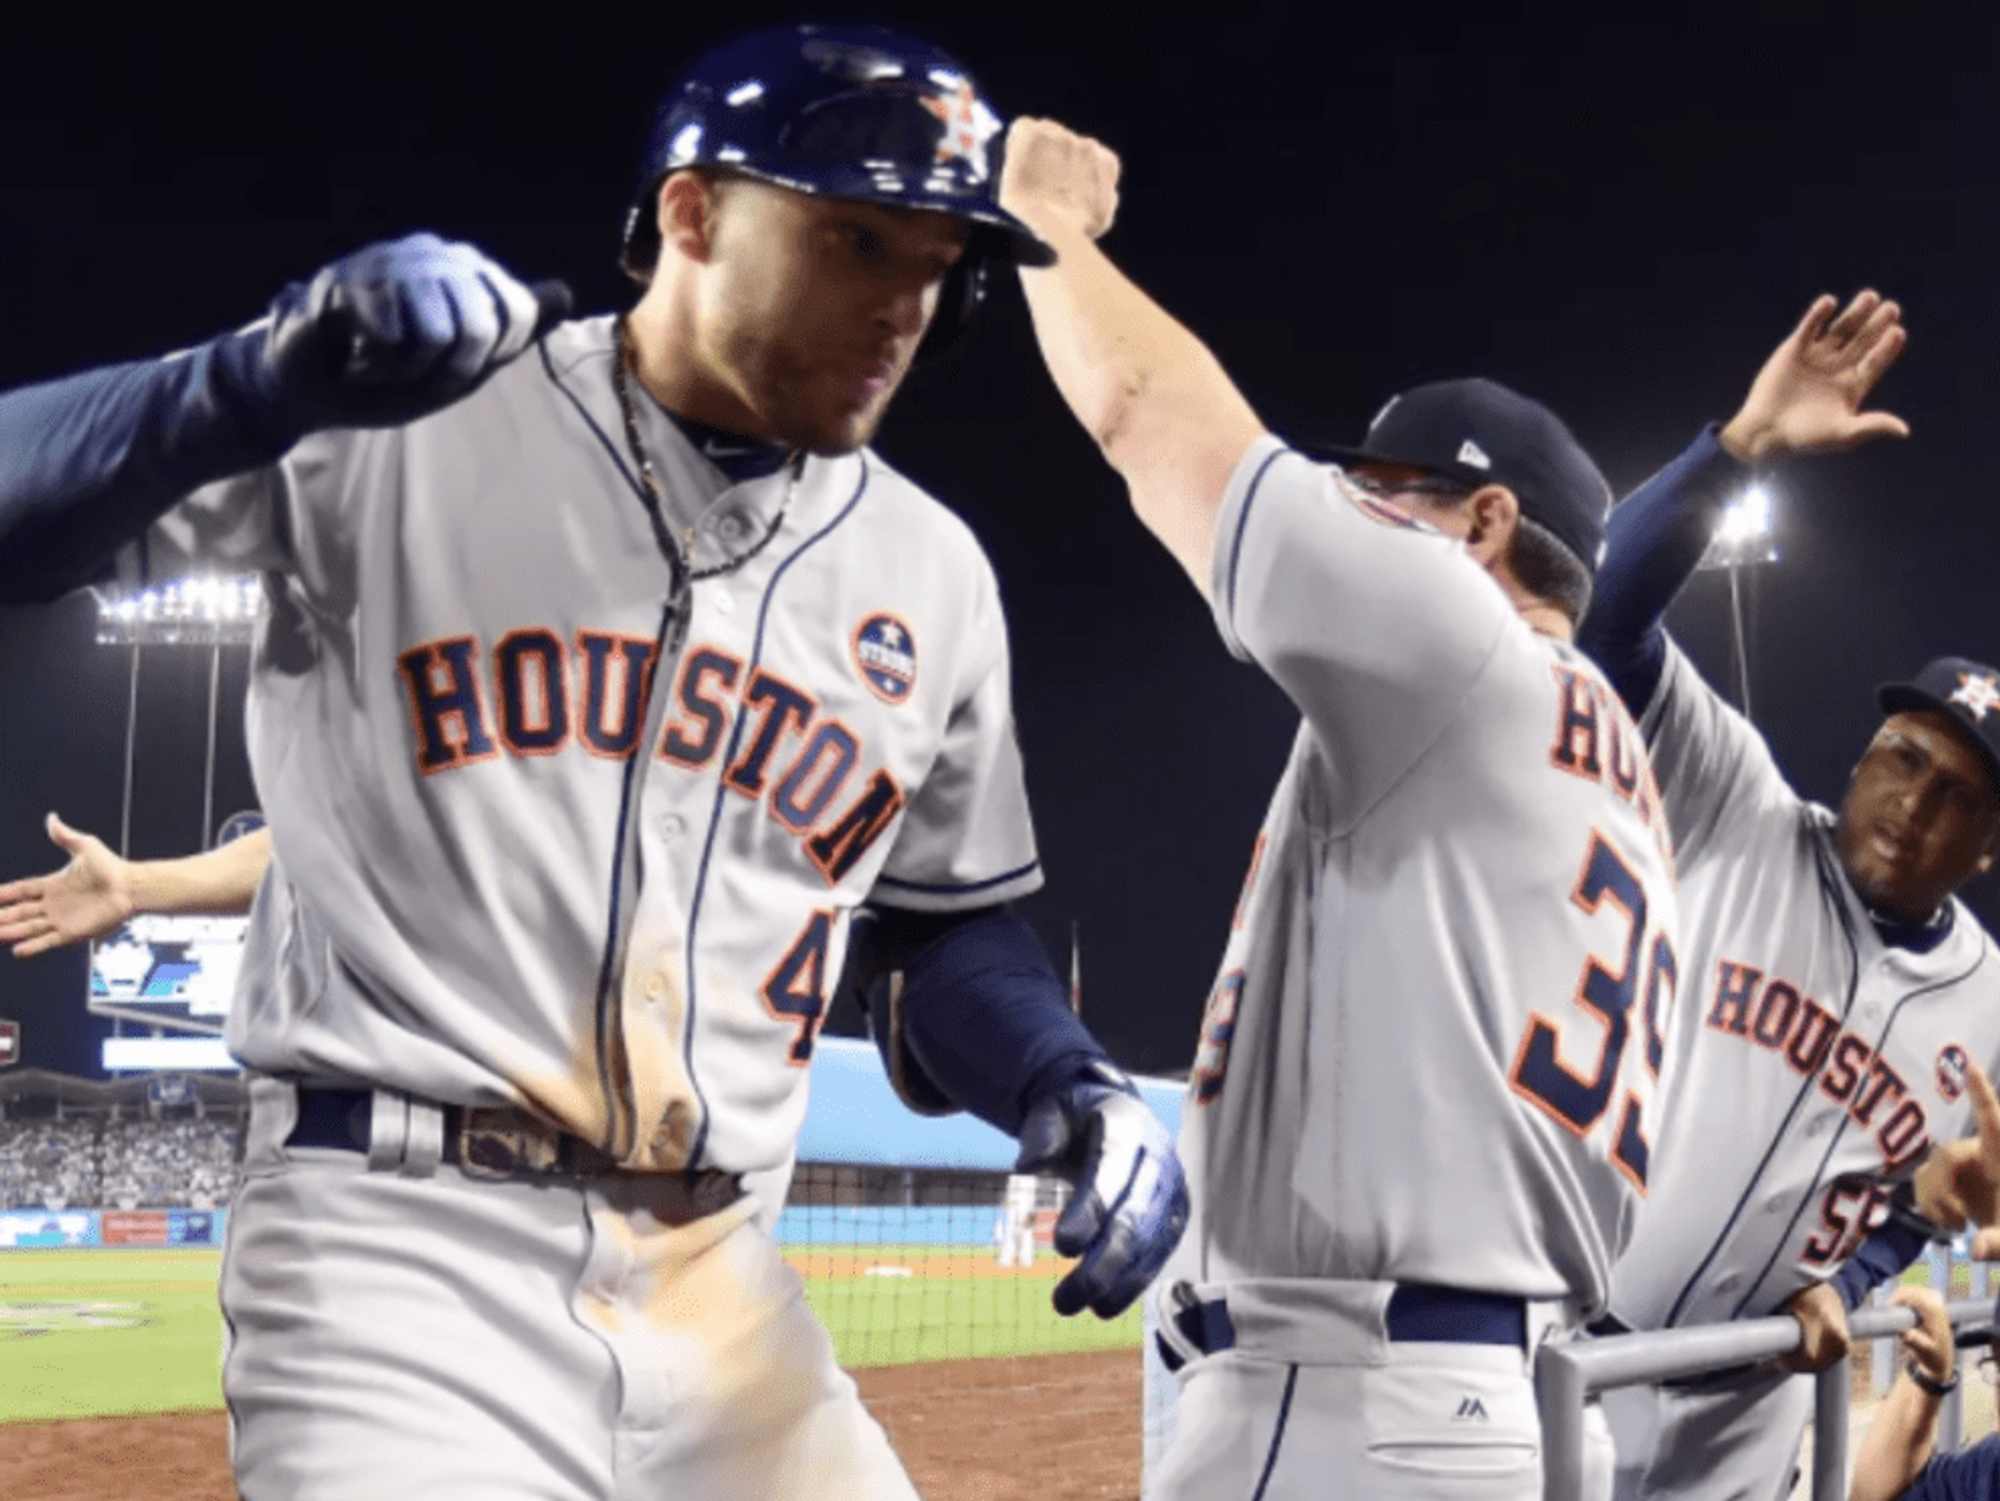 George Springer's 11th inning home run gave the Astros a much-needed win over LA in Game 2 of the World Series